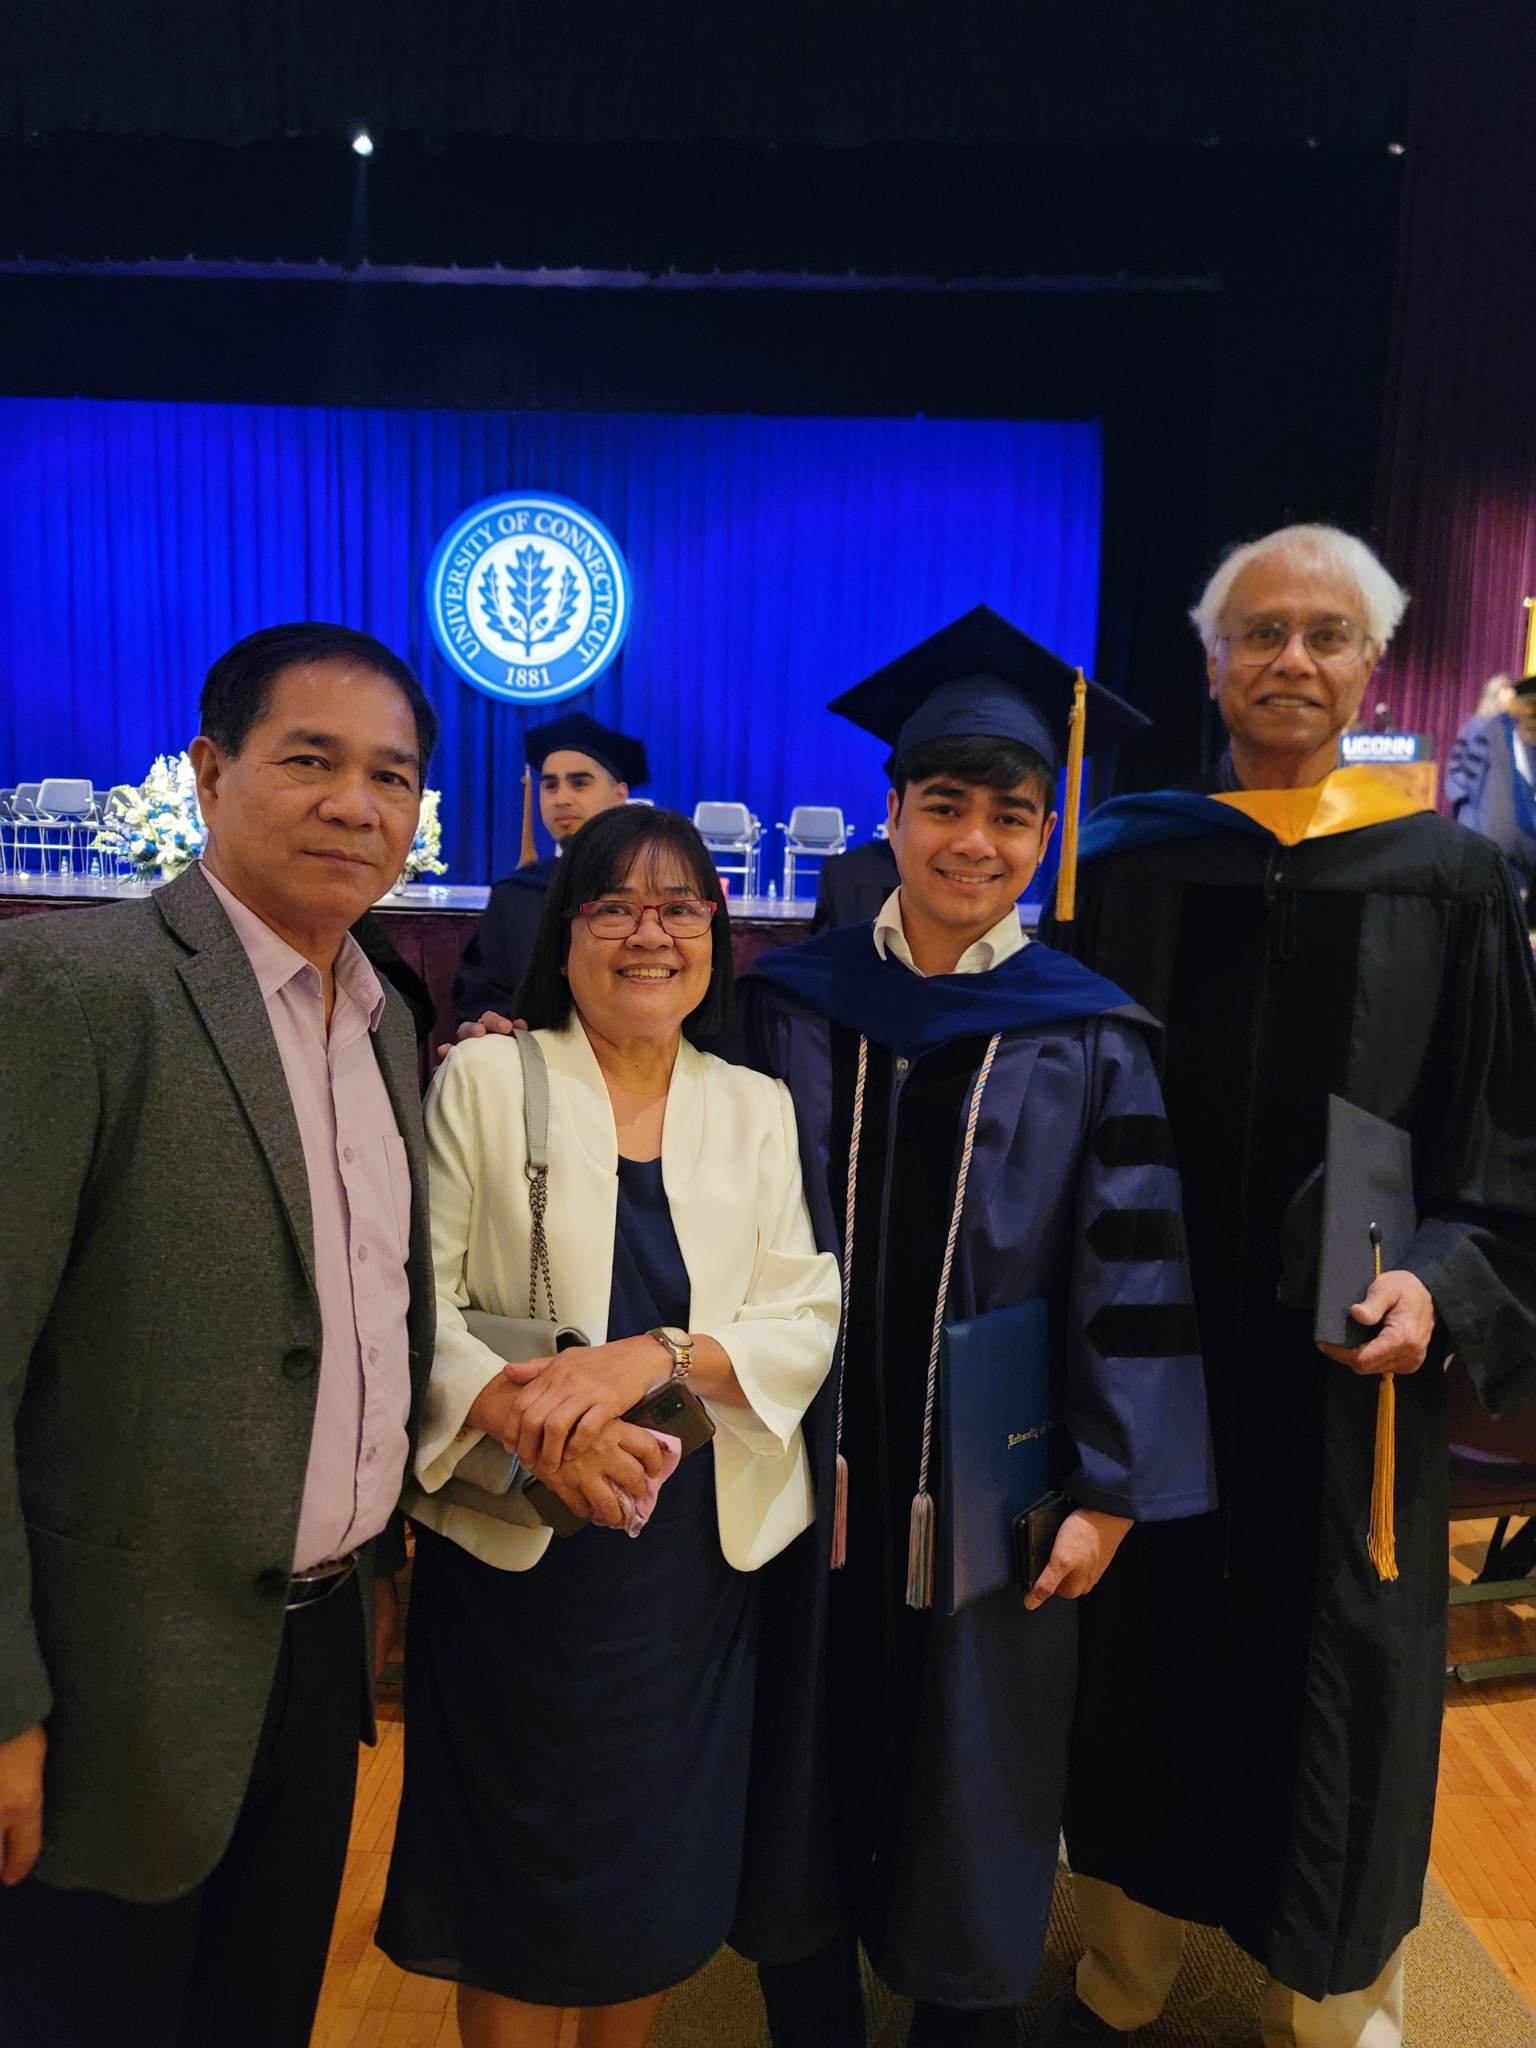 UConn 2023 Graduation ceremony with Henric and Dr. Basu